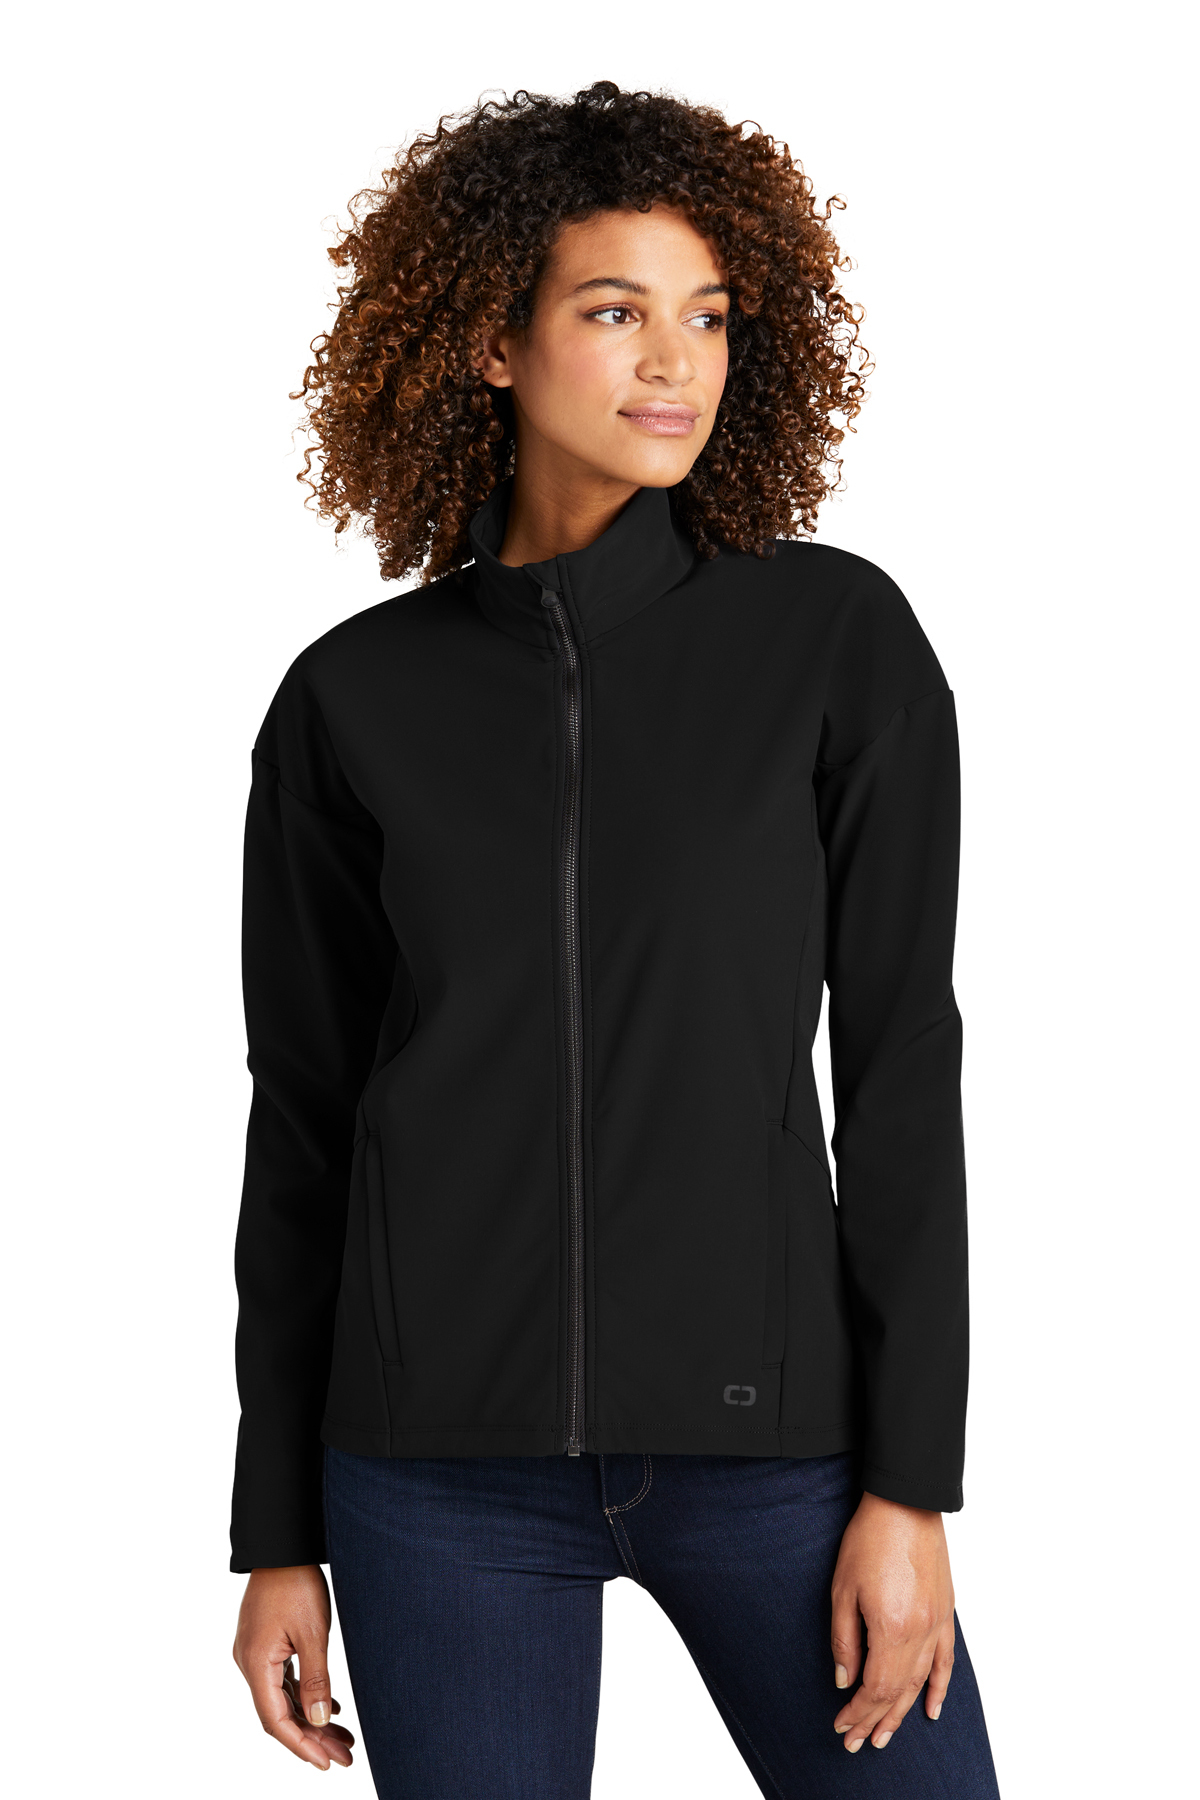 OGIO Ladies Commuter Full-Zip Soft Shell, Product